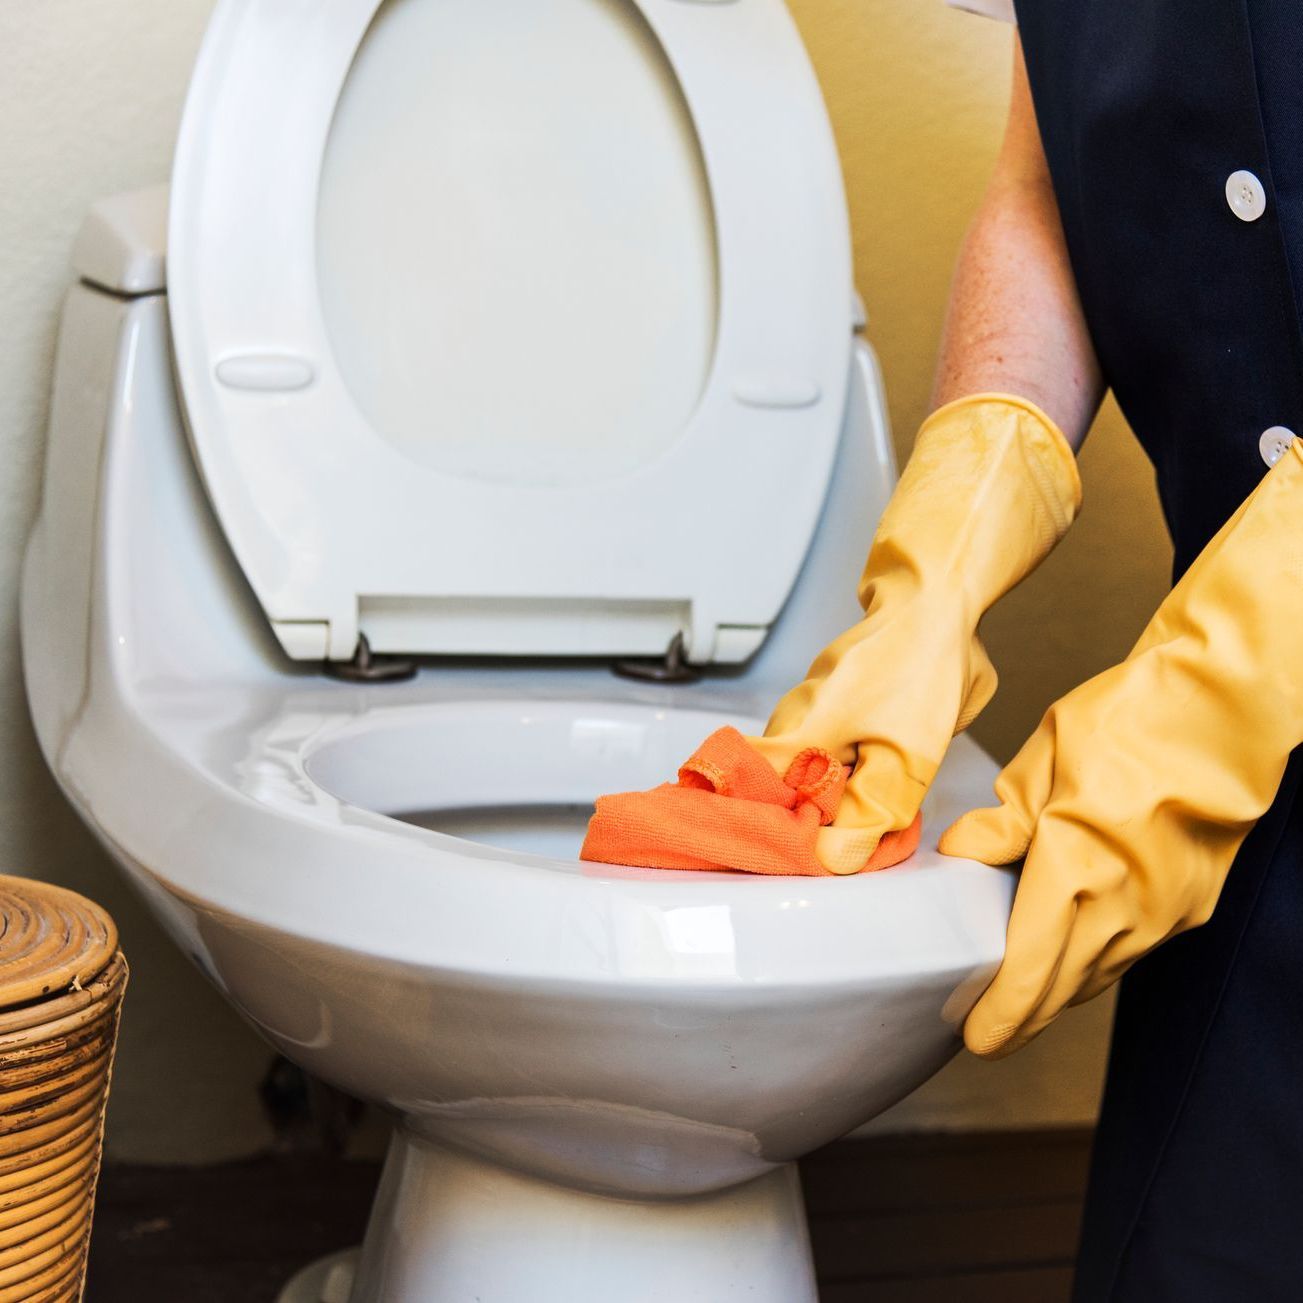 cleaning toilet bowl